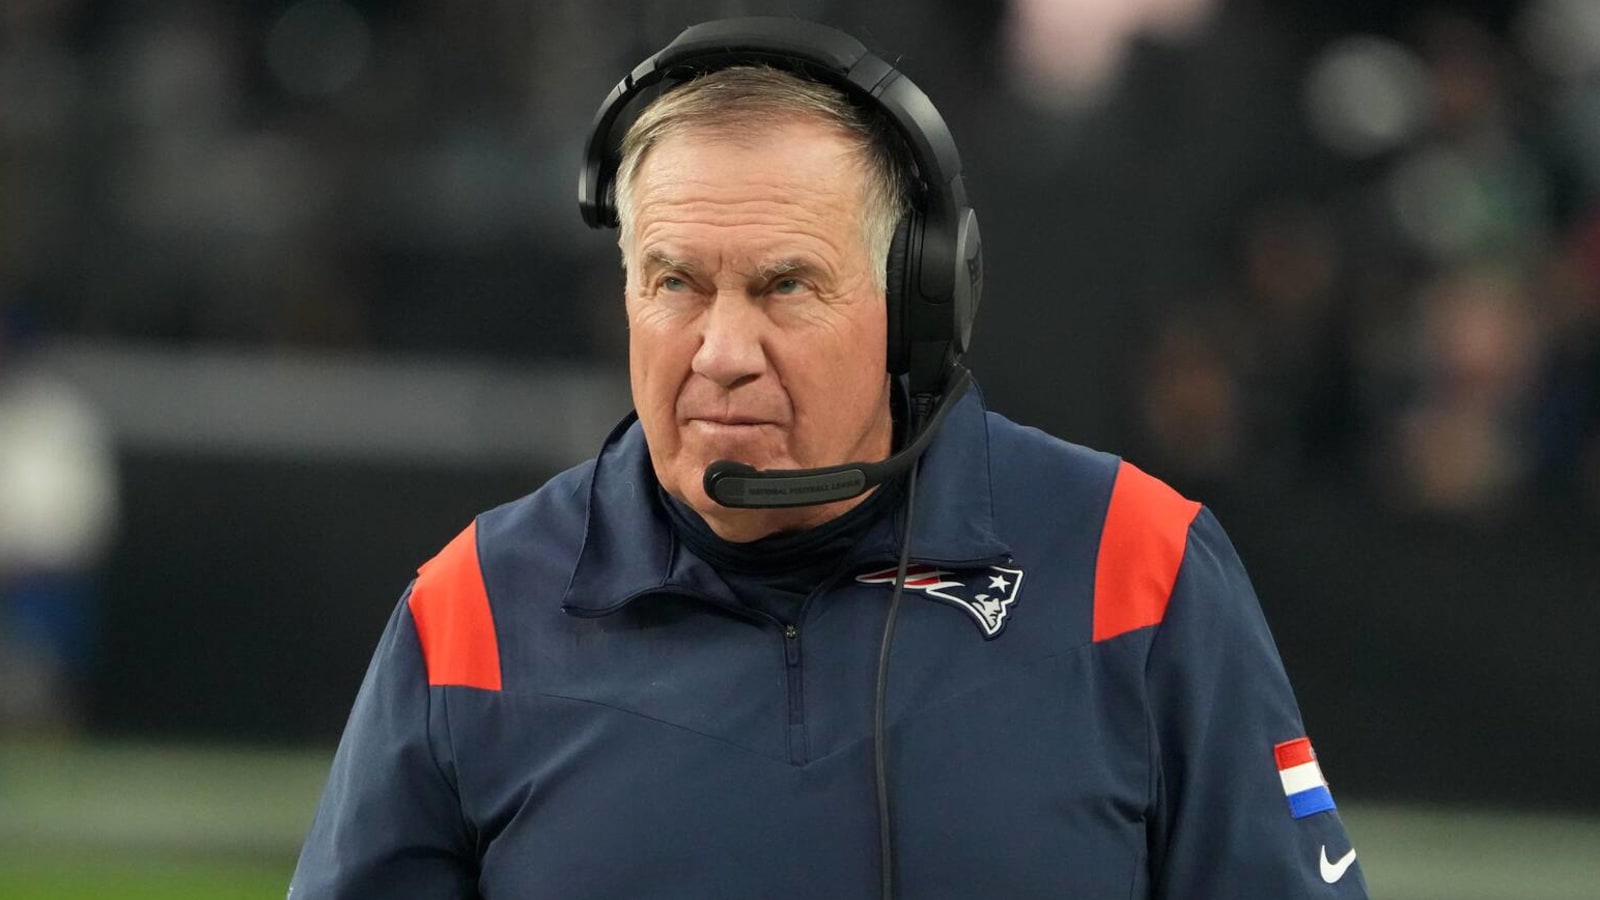 Insider reveals why Pats players were frustrated with Belichick